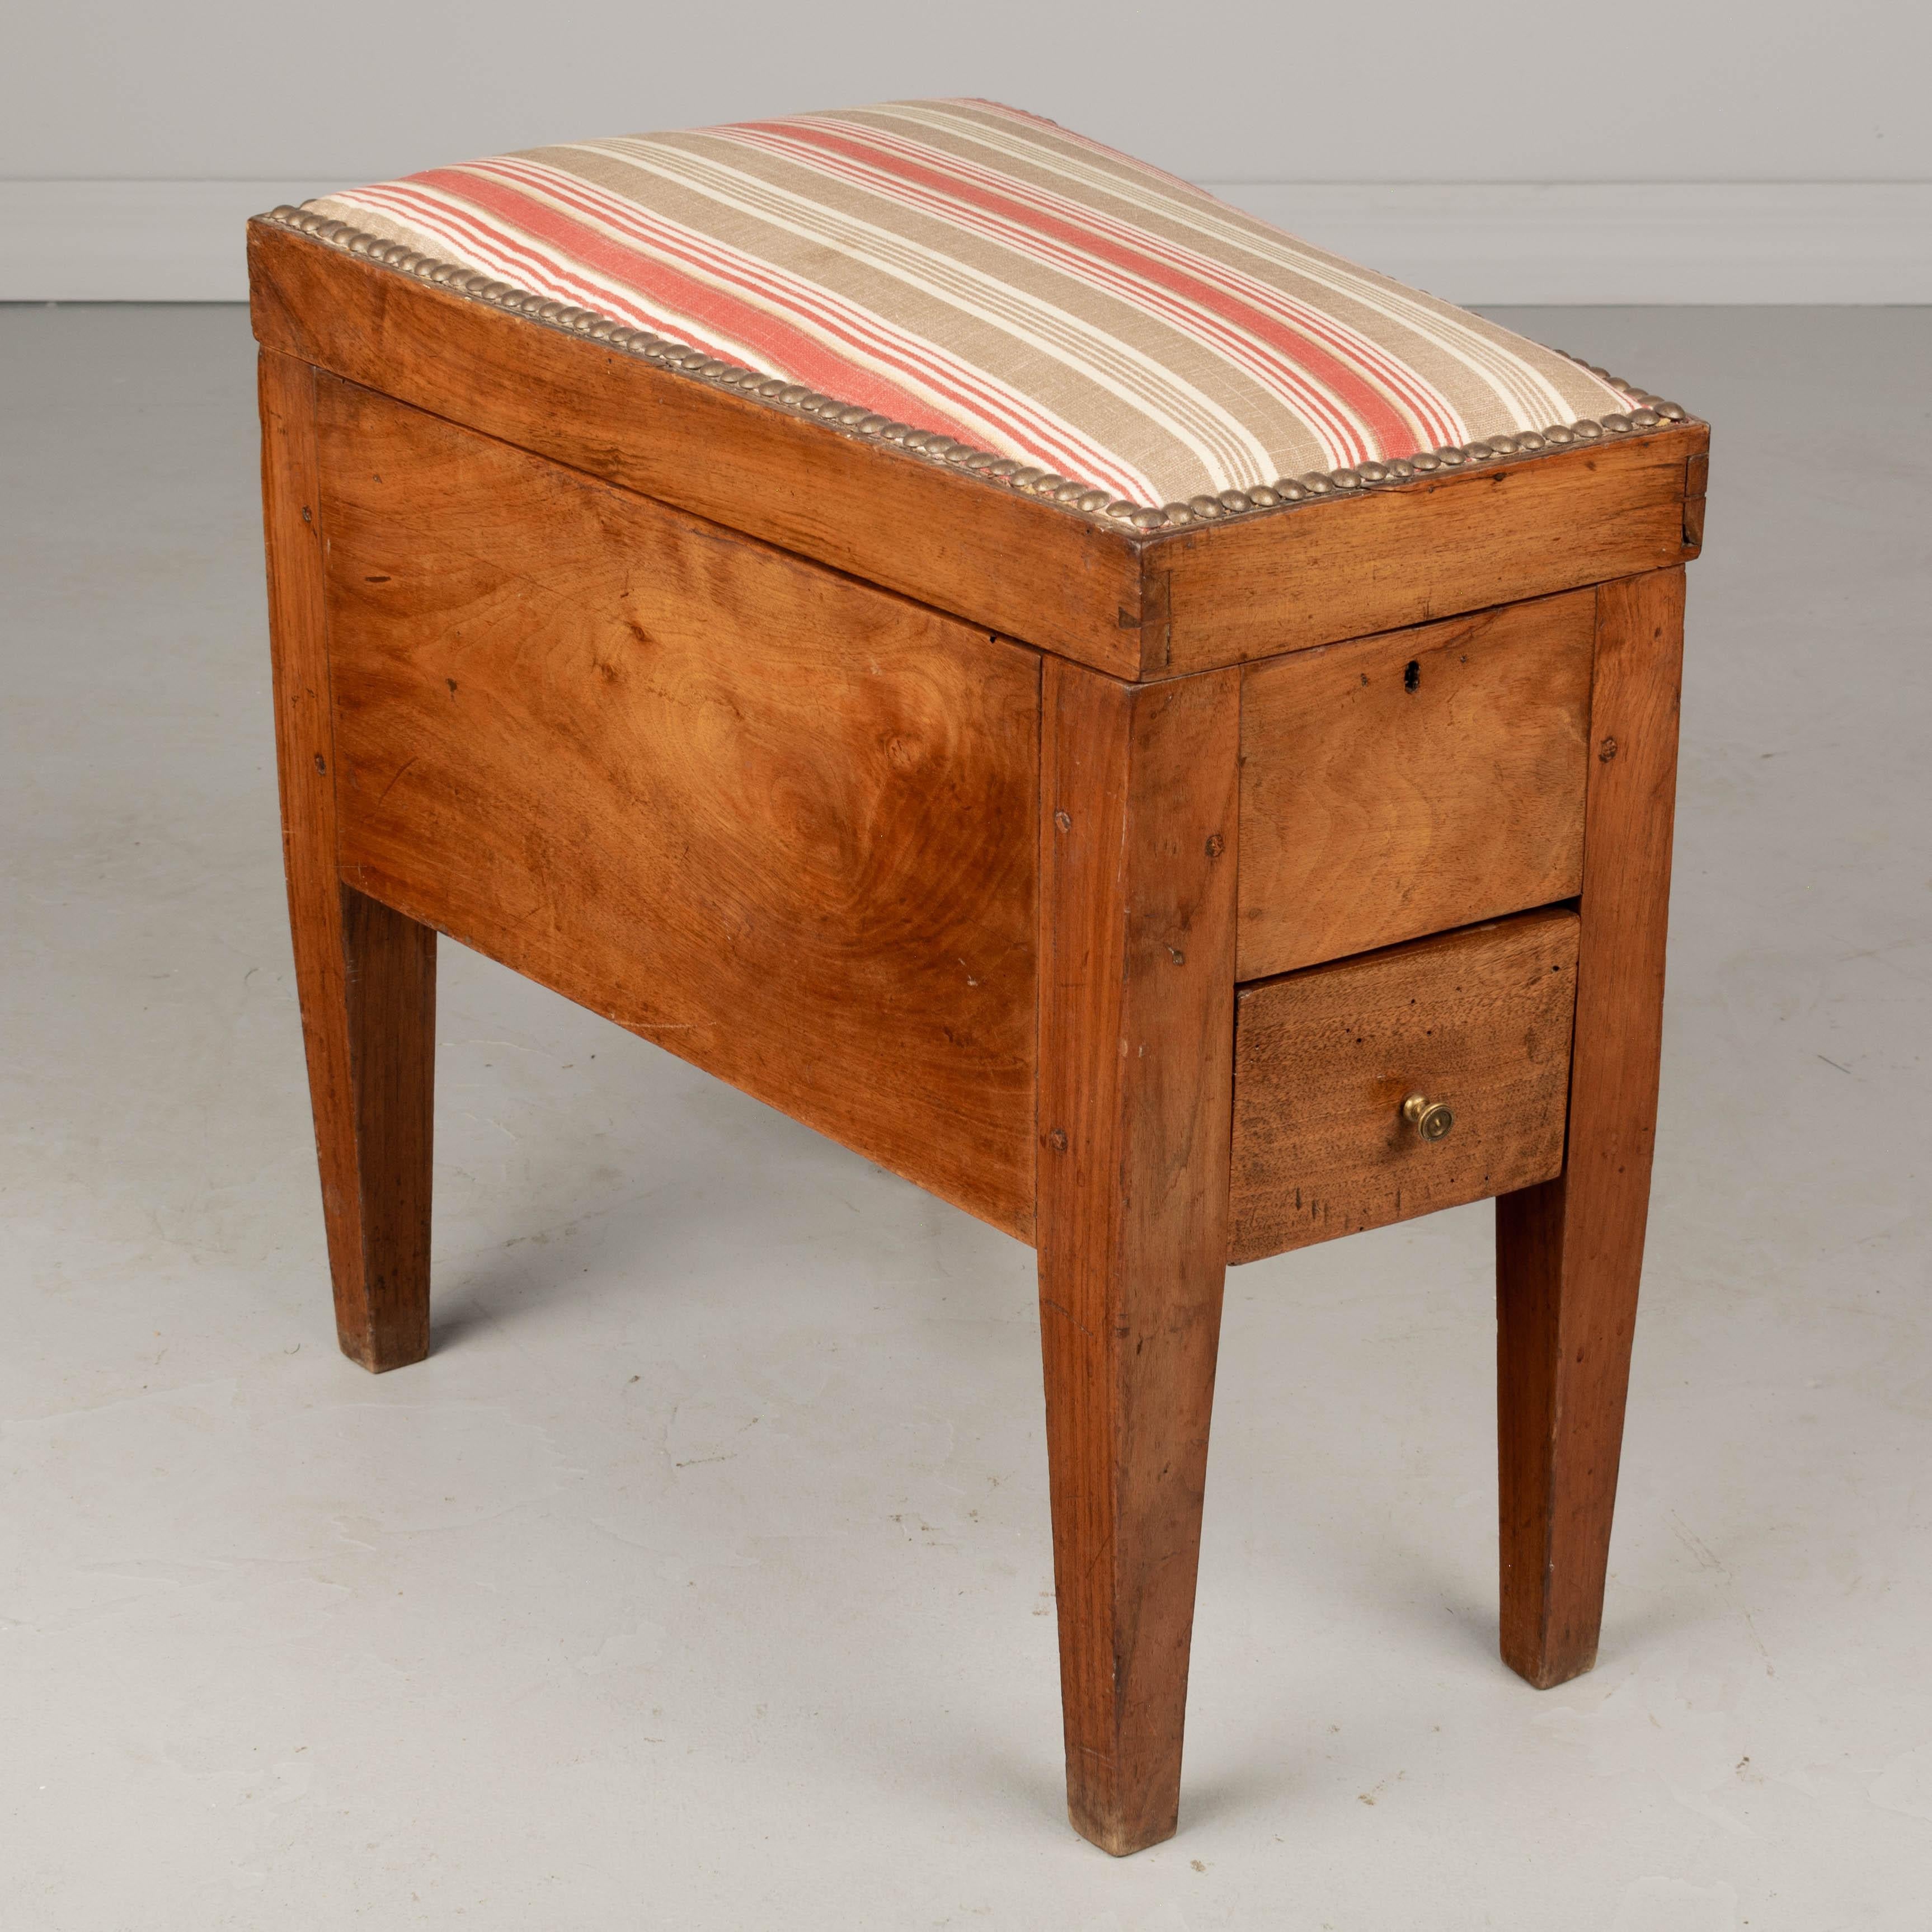 A 19th century French shoe shine stool made of solid walnut. The upholstered seat opens to a felt lined interior for storing polish and brushes. Small drawer below with brass pull. Pegged construction and sturdy dovetailed frame. New brass hinges.